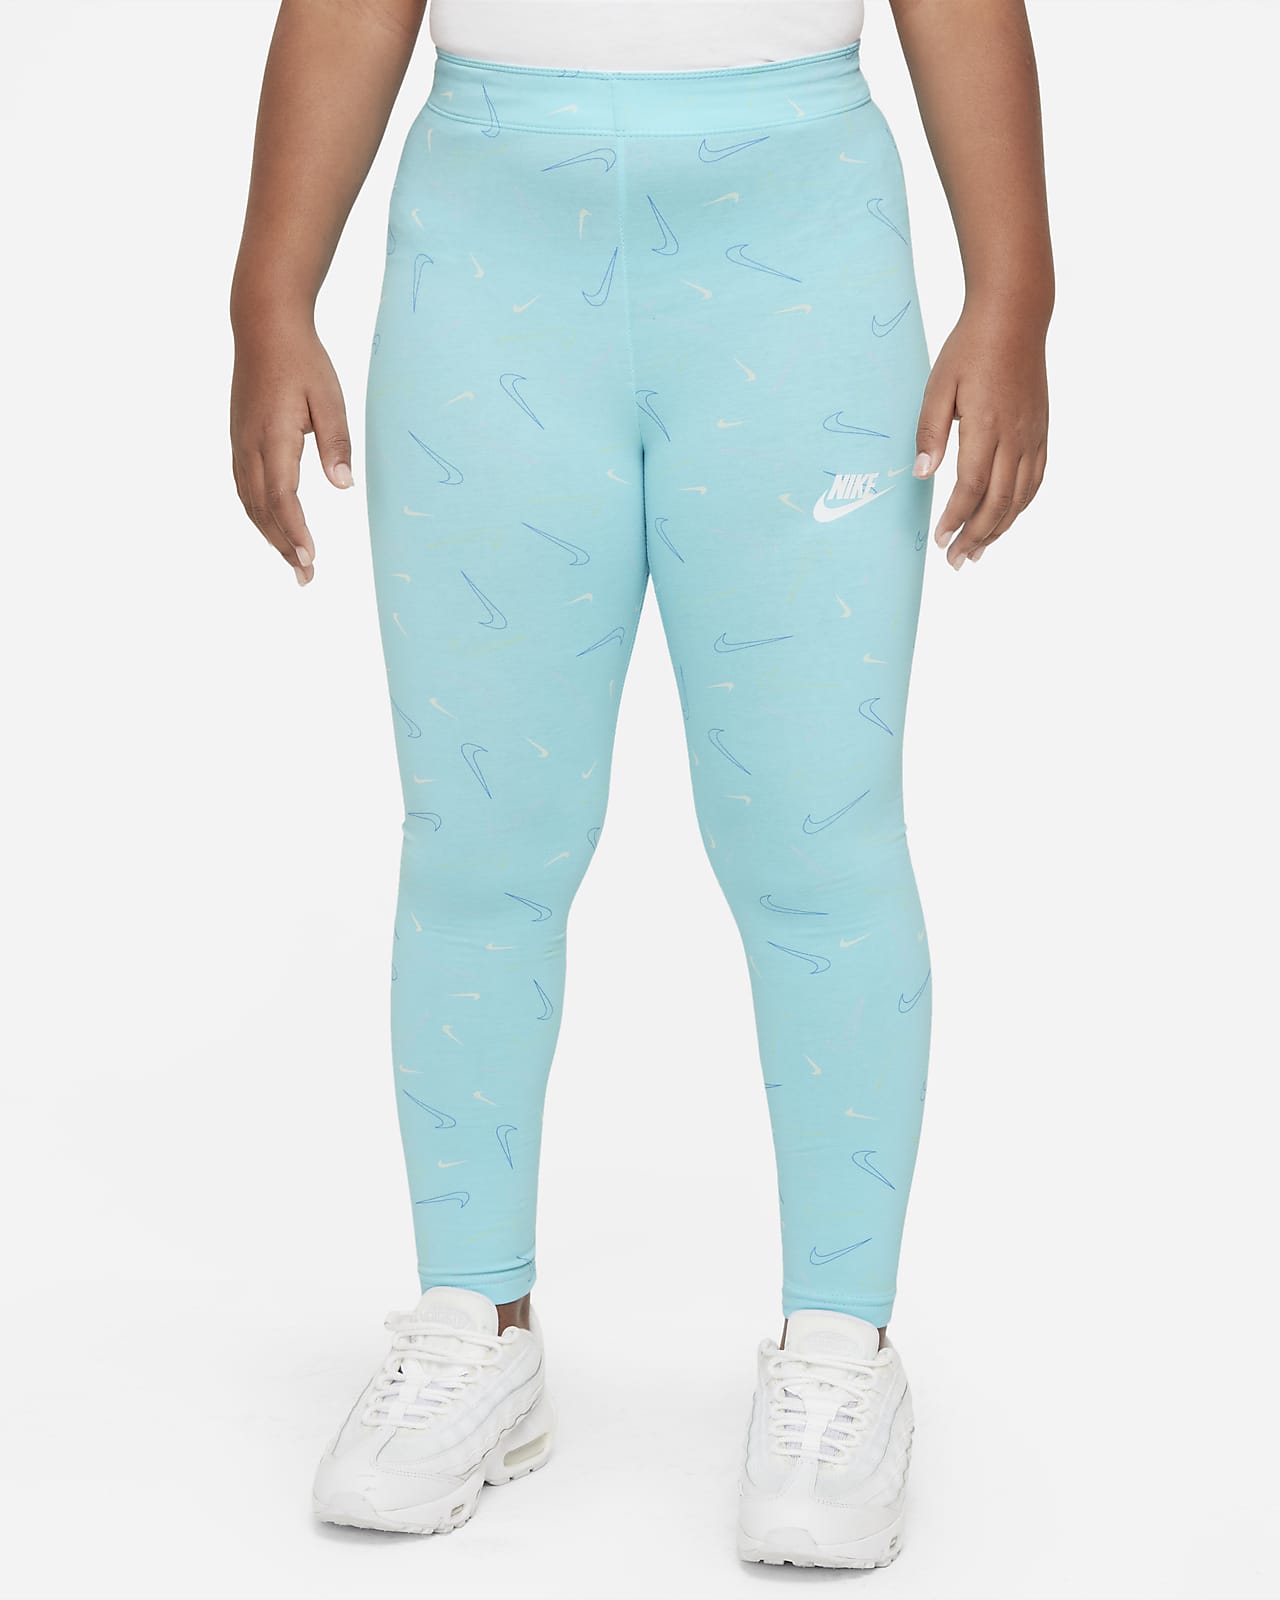 https://static.nike.com/a/images/t_PDP_1280_v1/f_auto,q_auto:eco/cb6648c1-ed5d-4a9a-affb-effaab41f203/sportswear-favorites-big-kids-girls-printed-leggings-extended-size-QSnK1W.png